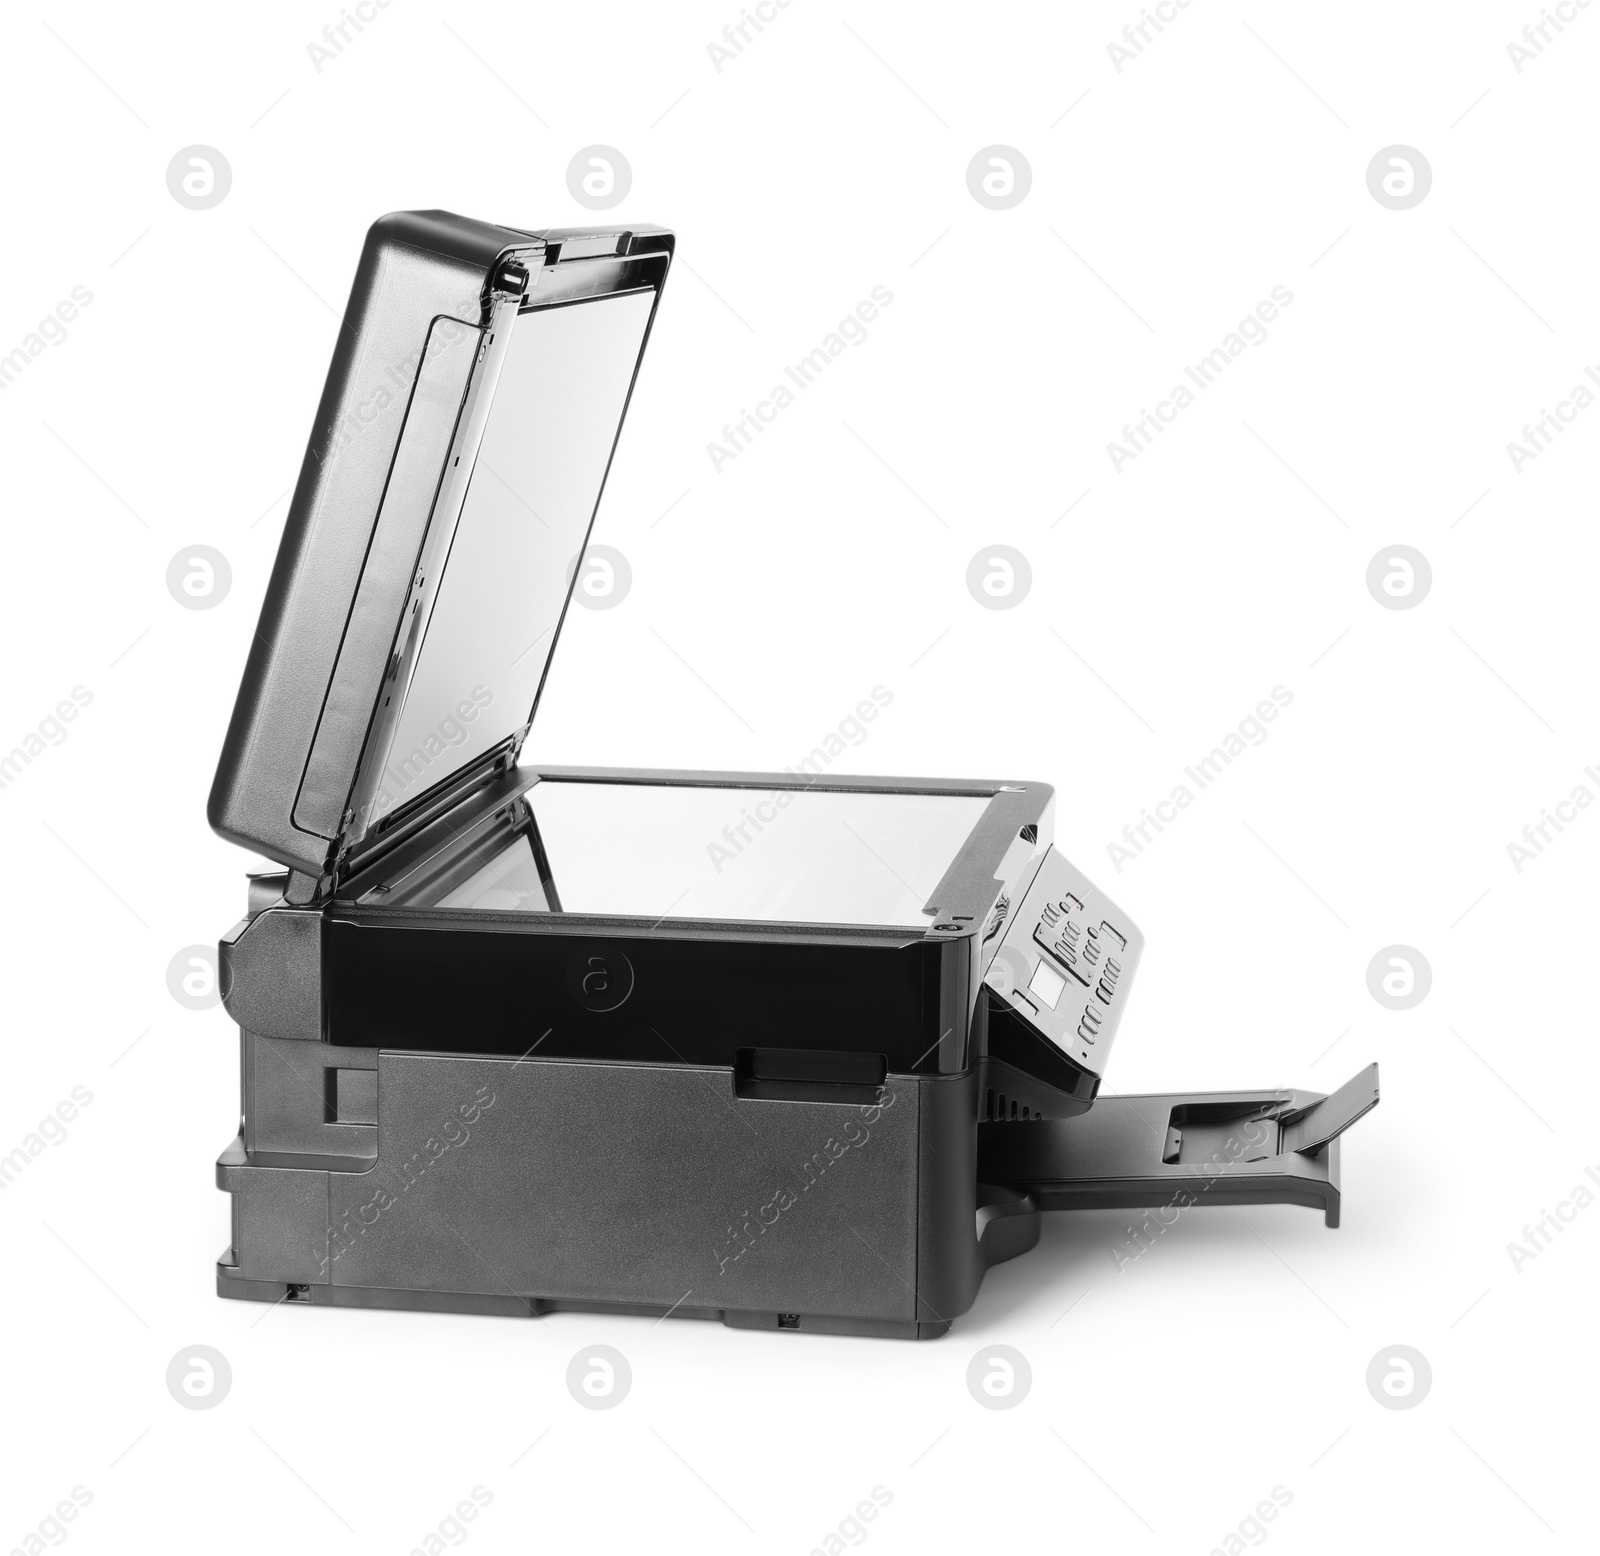 Photo of New open multifunction printer isolated on white